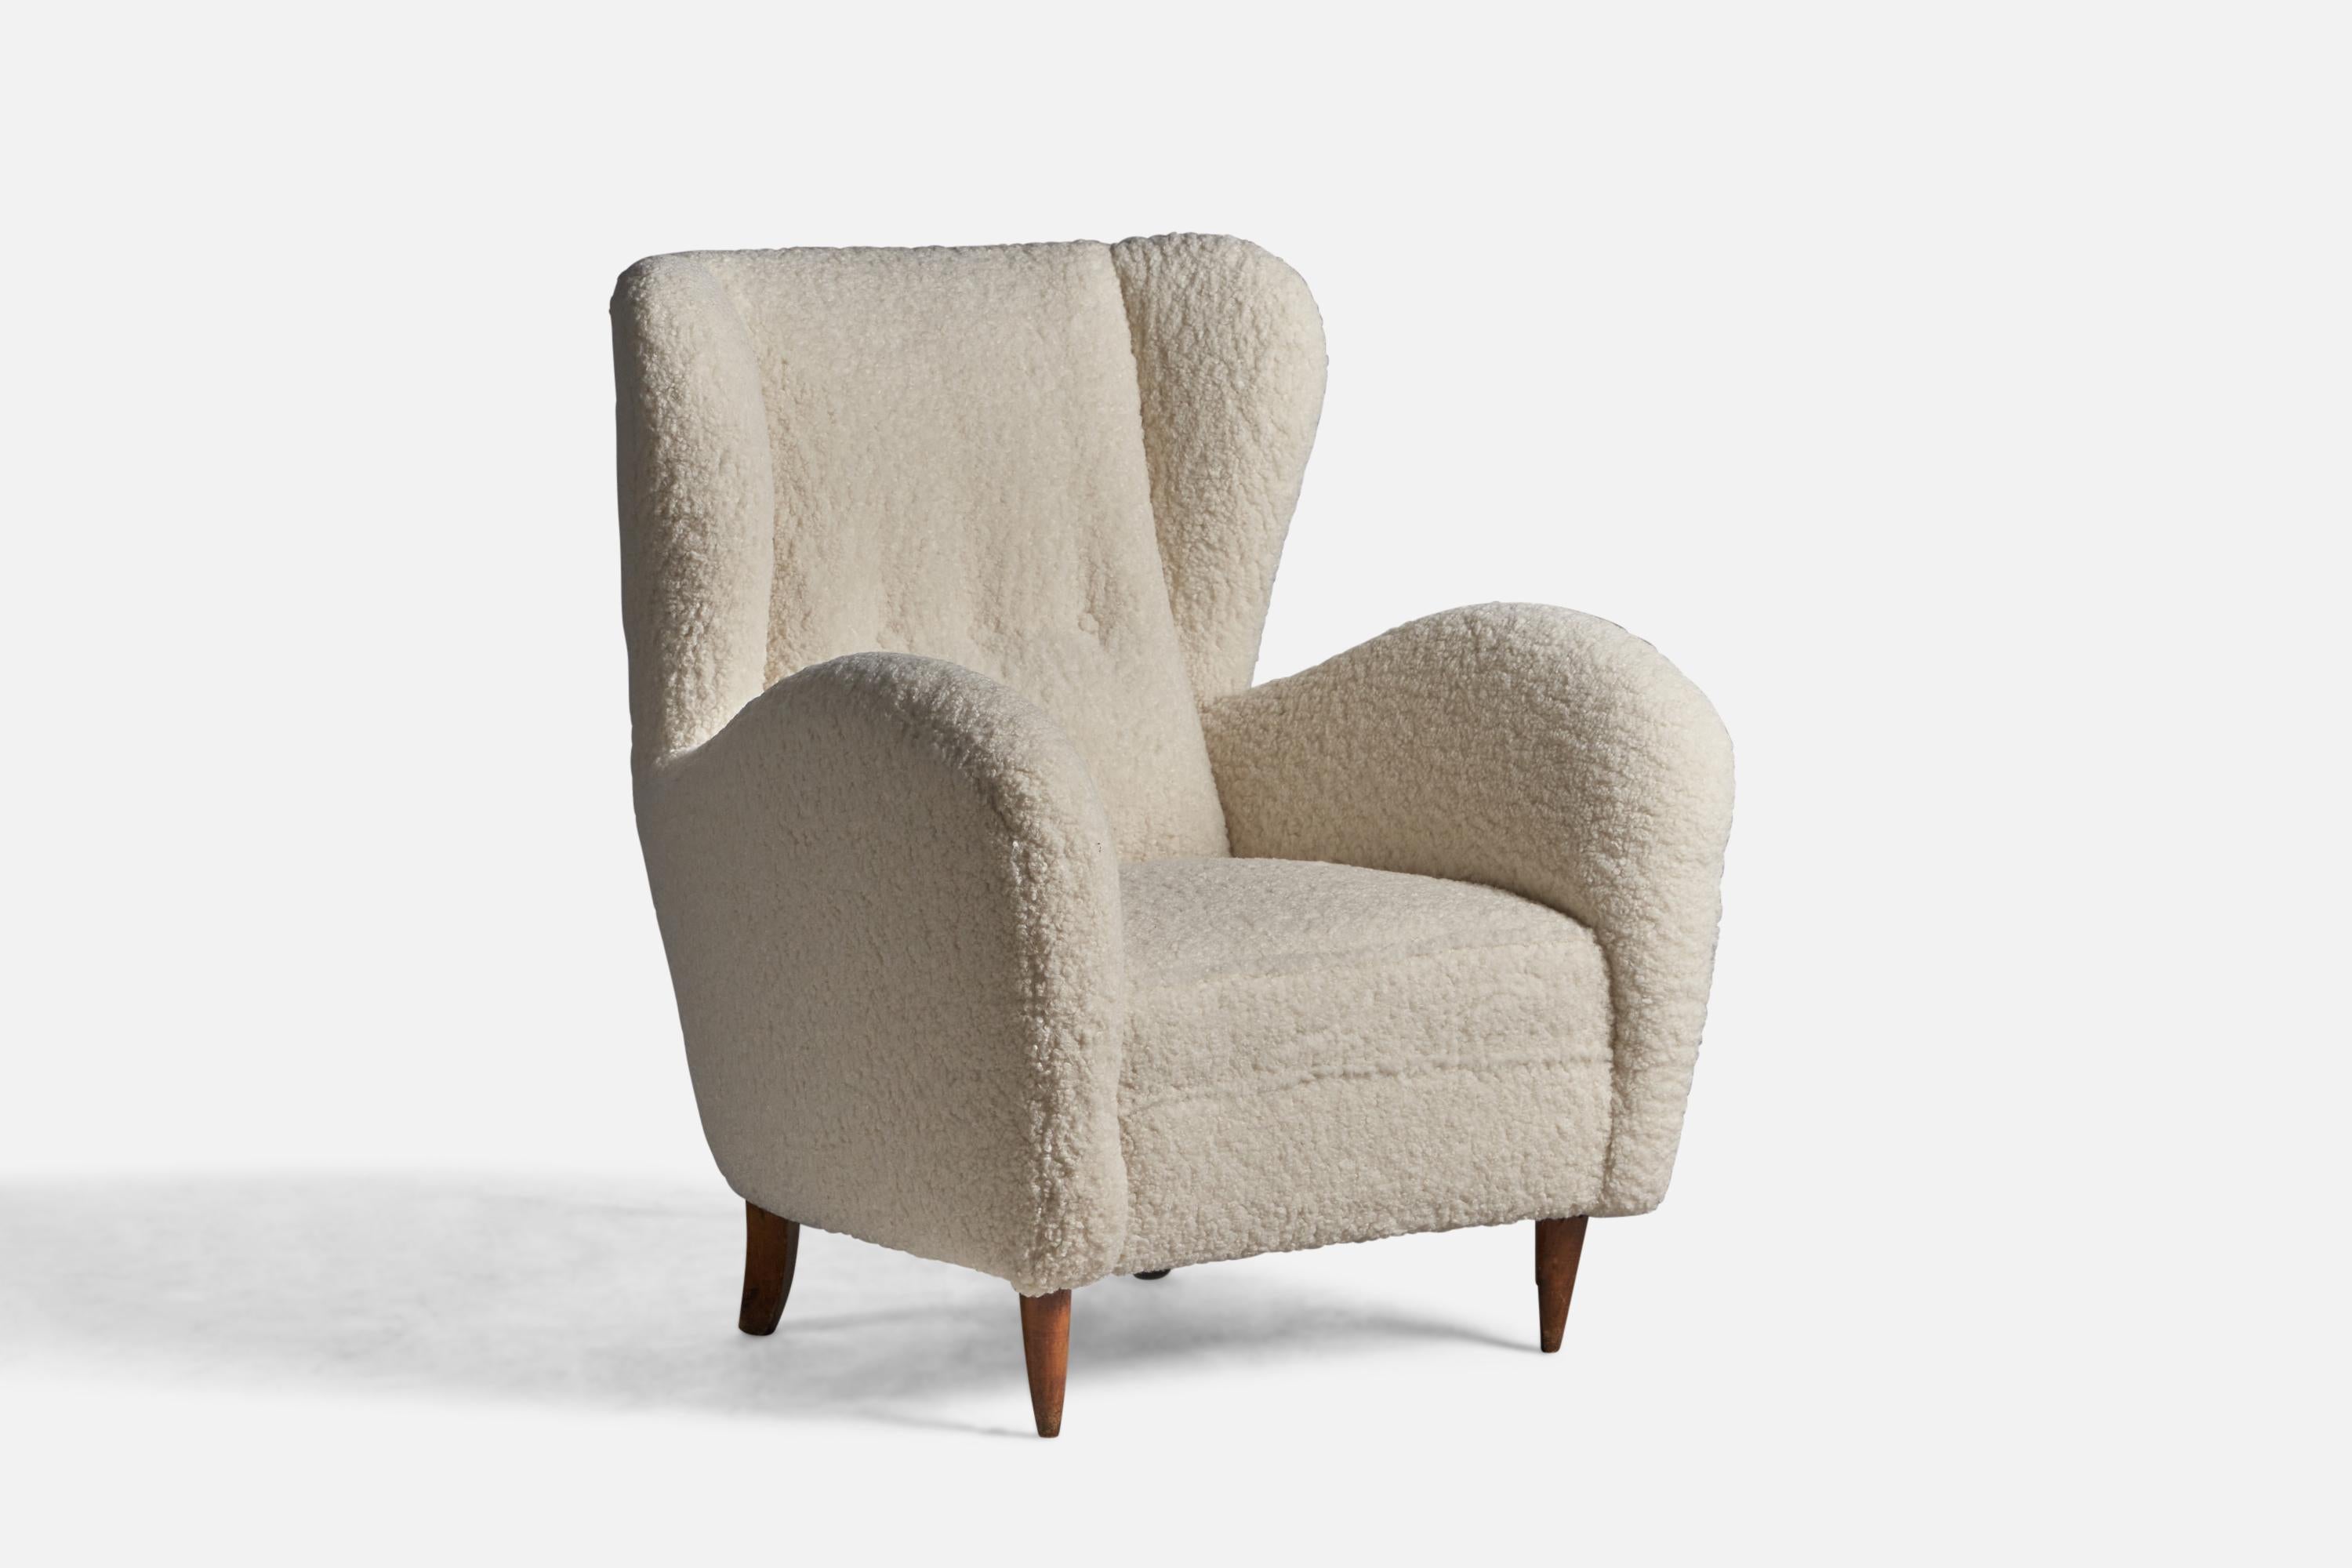 A wood and white bouclé fabric lounge chair designed and produced in Italy, 1940s.

15